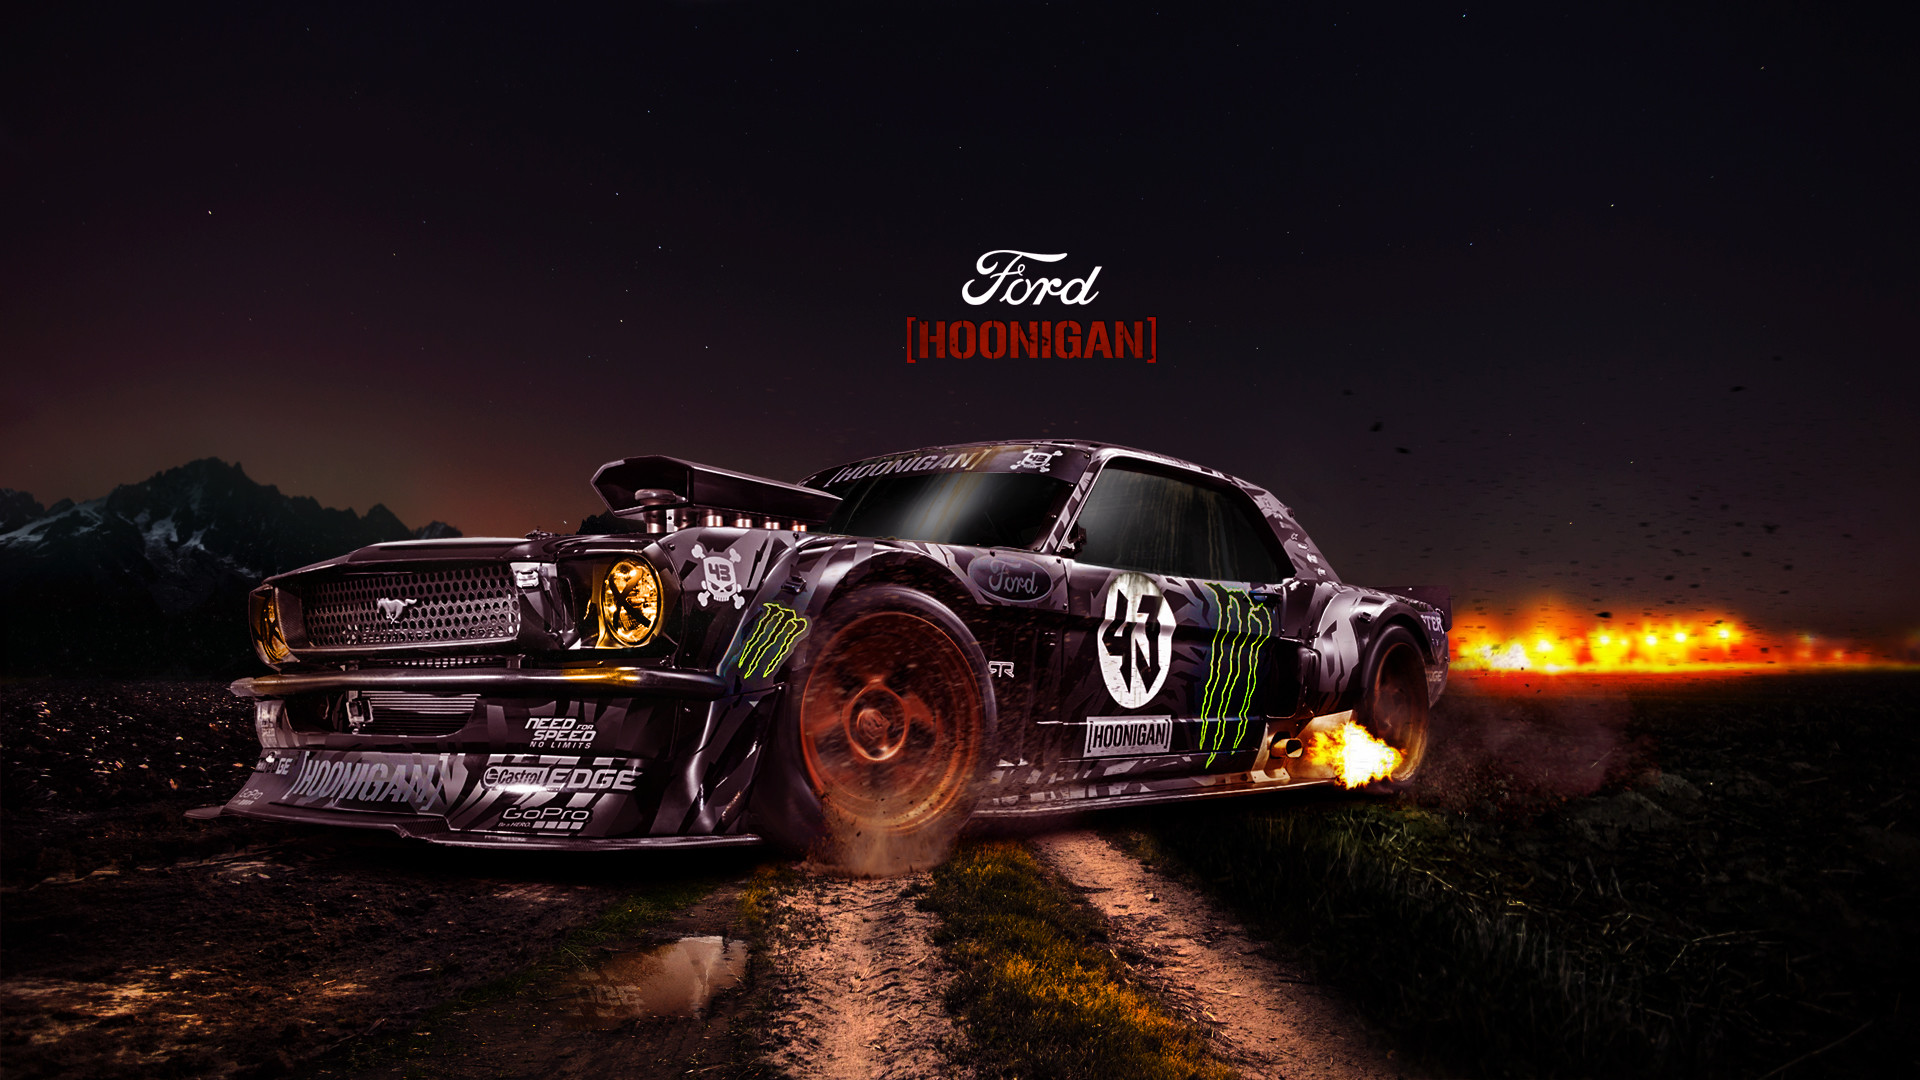 1920x1080 Hoonigan Wallpaper HD 81 images Source Â· Hoonigan ford s old car by  temo4hossam